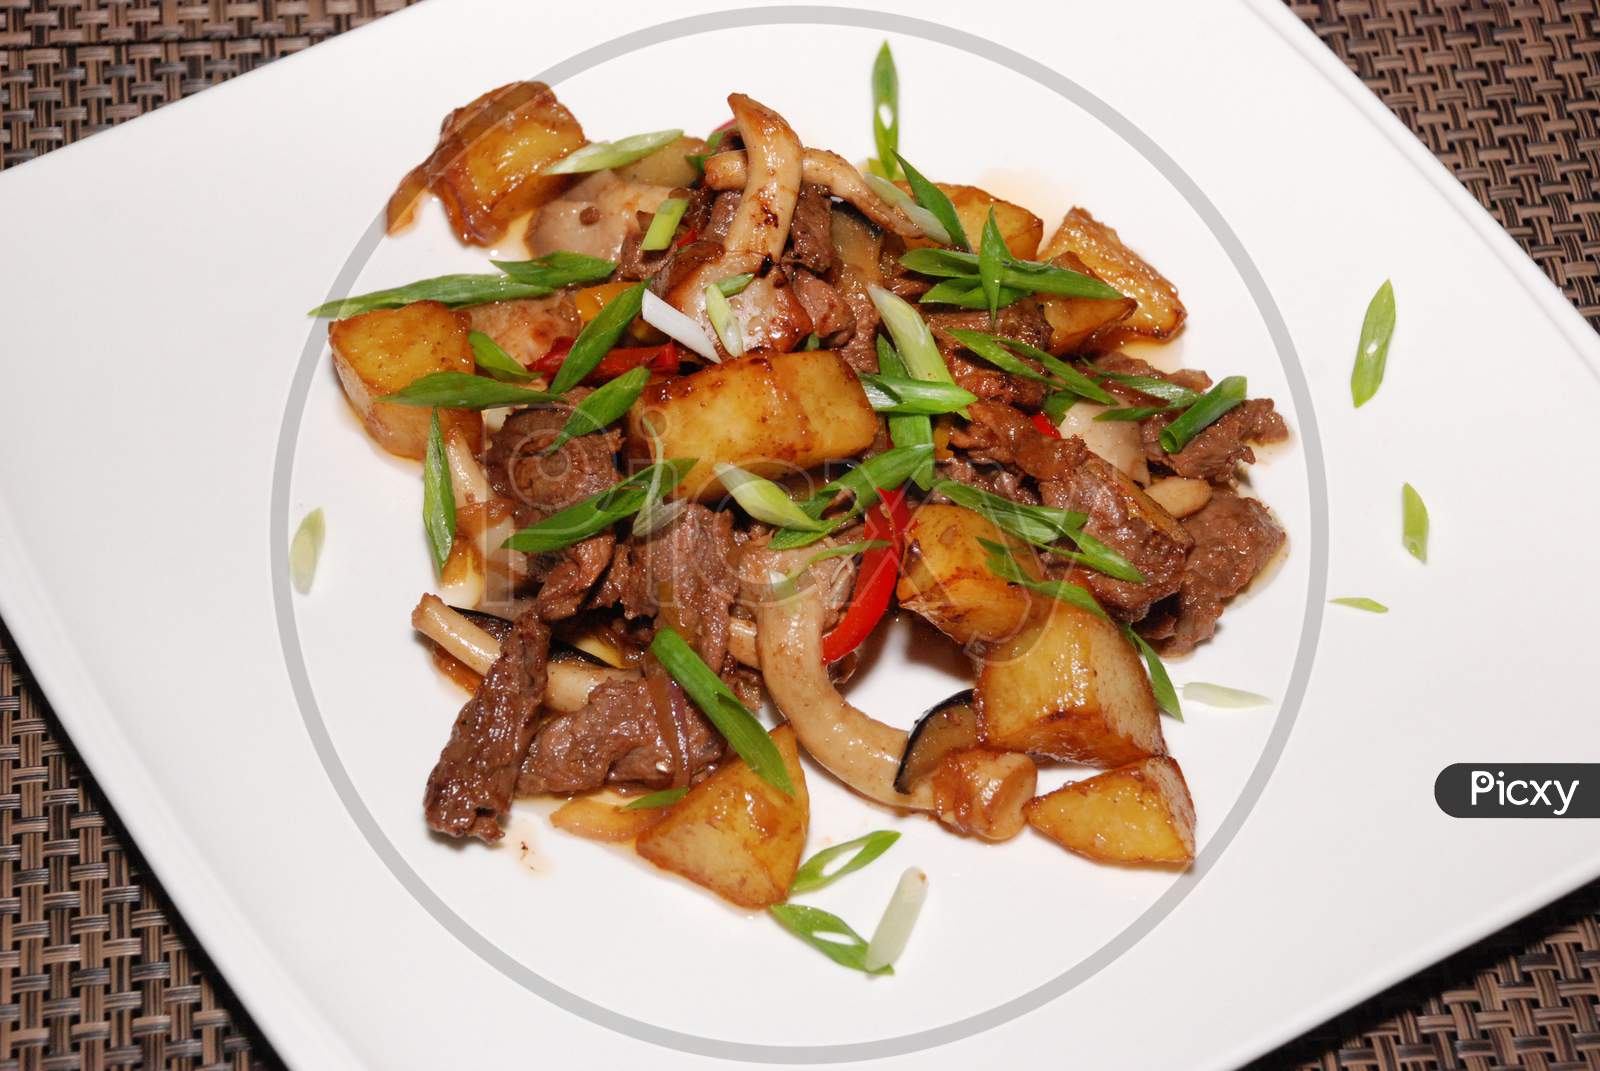 Fried Beef With Green Onion, Mushrooms And Potatoes